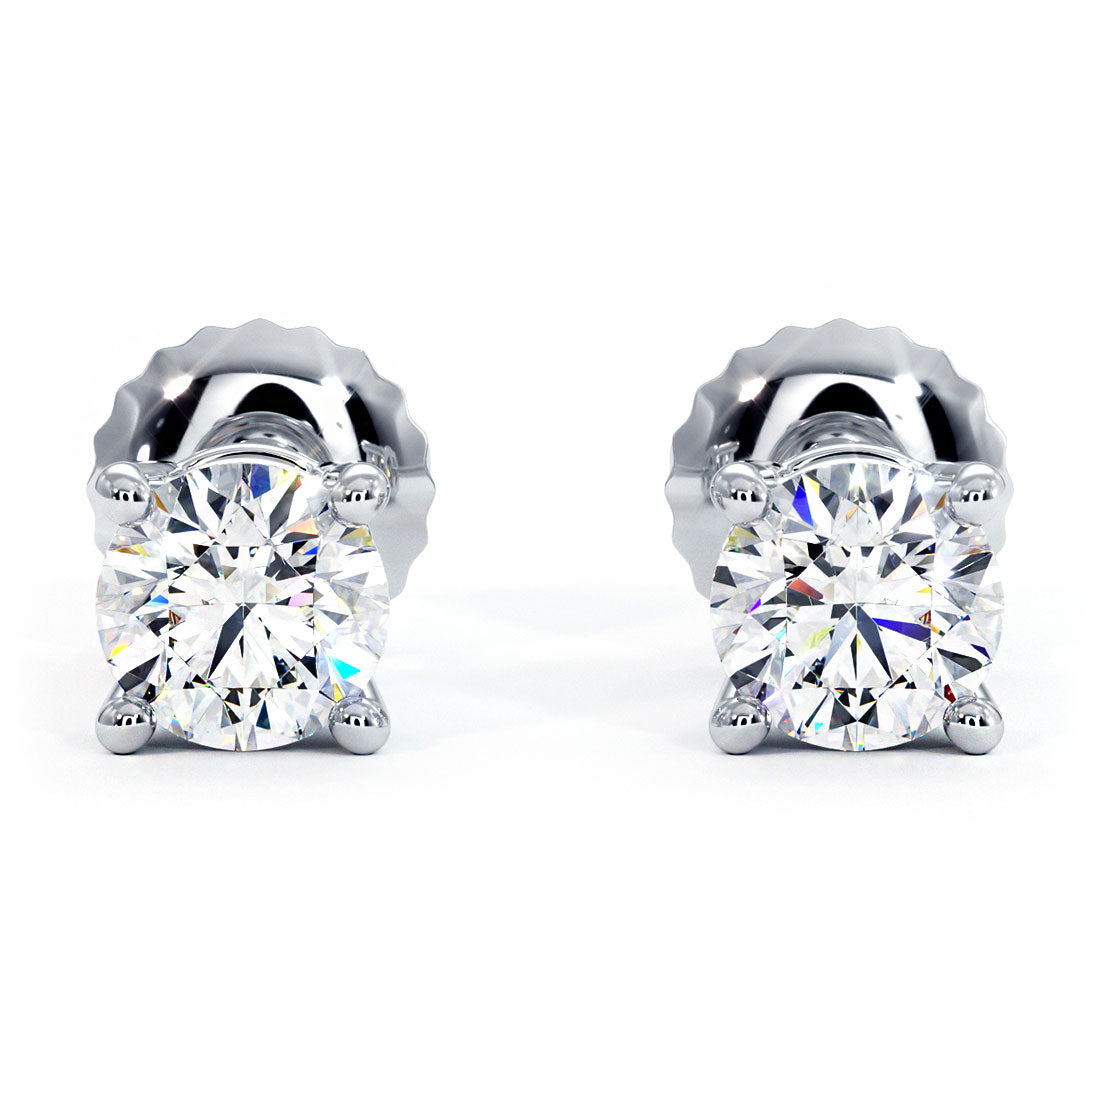 A stunning pair of PREMIUM SIGNATURE QUALITY diamond solitaire stud earrings weighing 1 1/2 carat total weight. The diamonds are set on 14K white gold basket settings with screw back posts